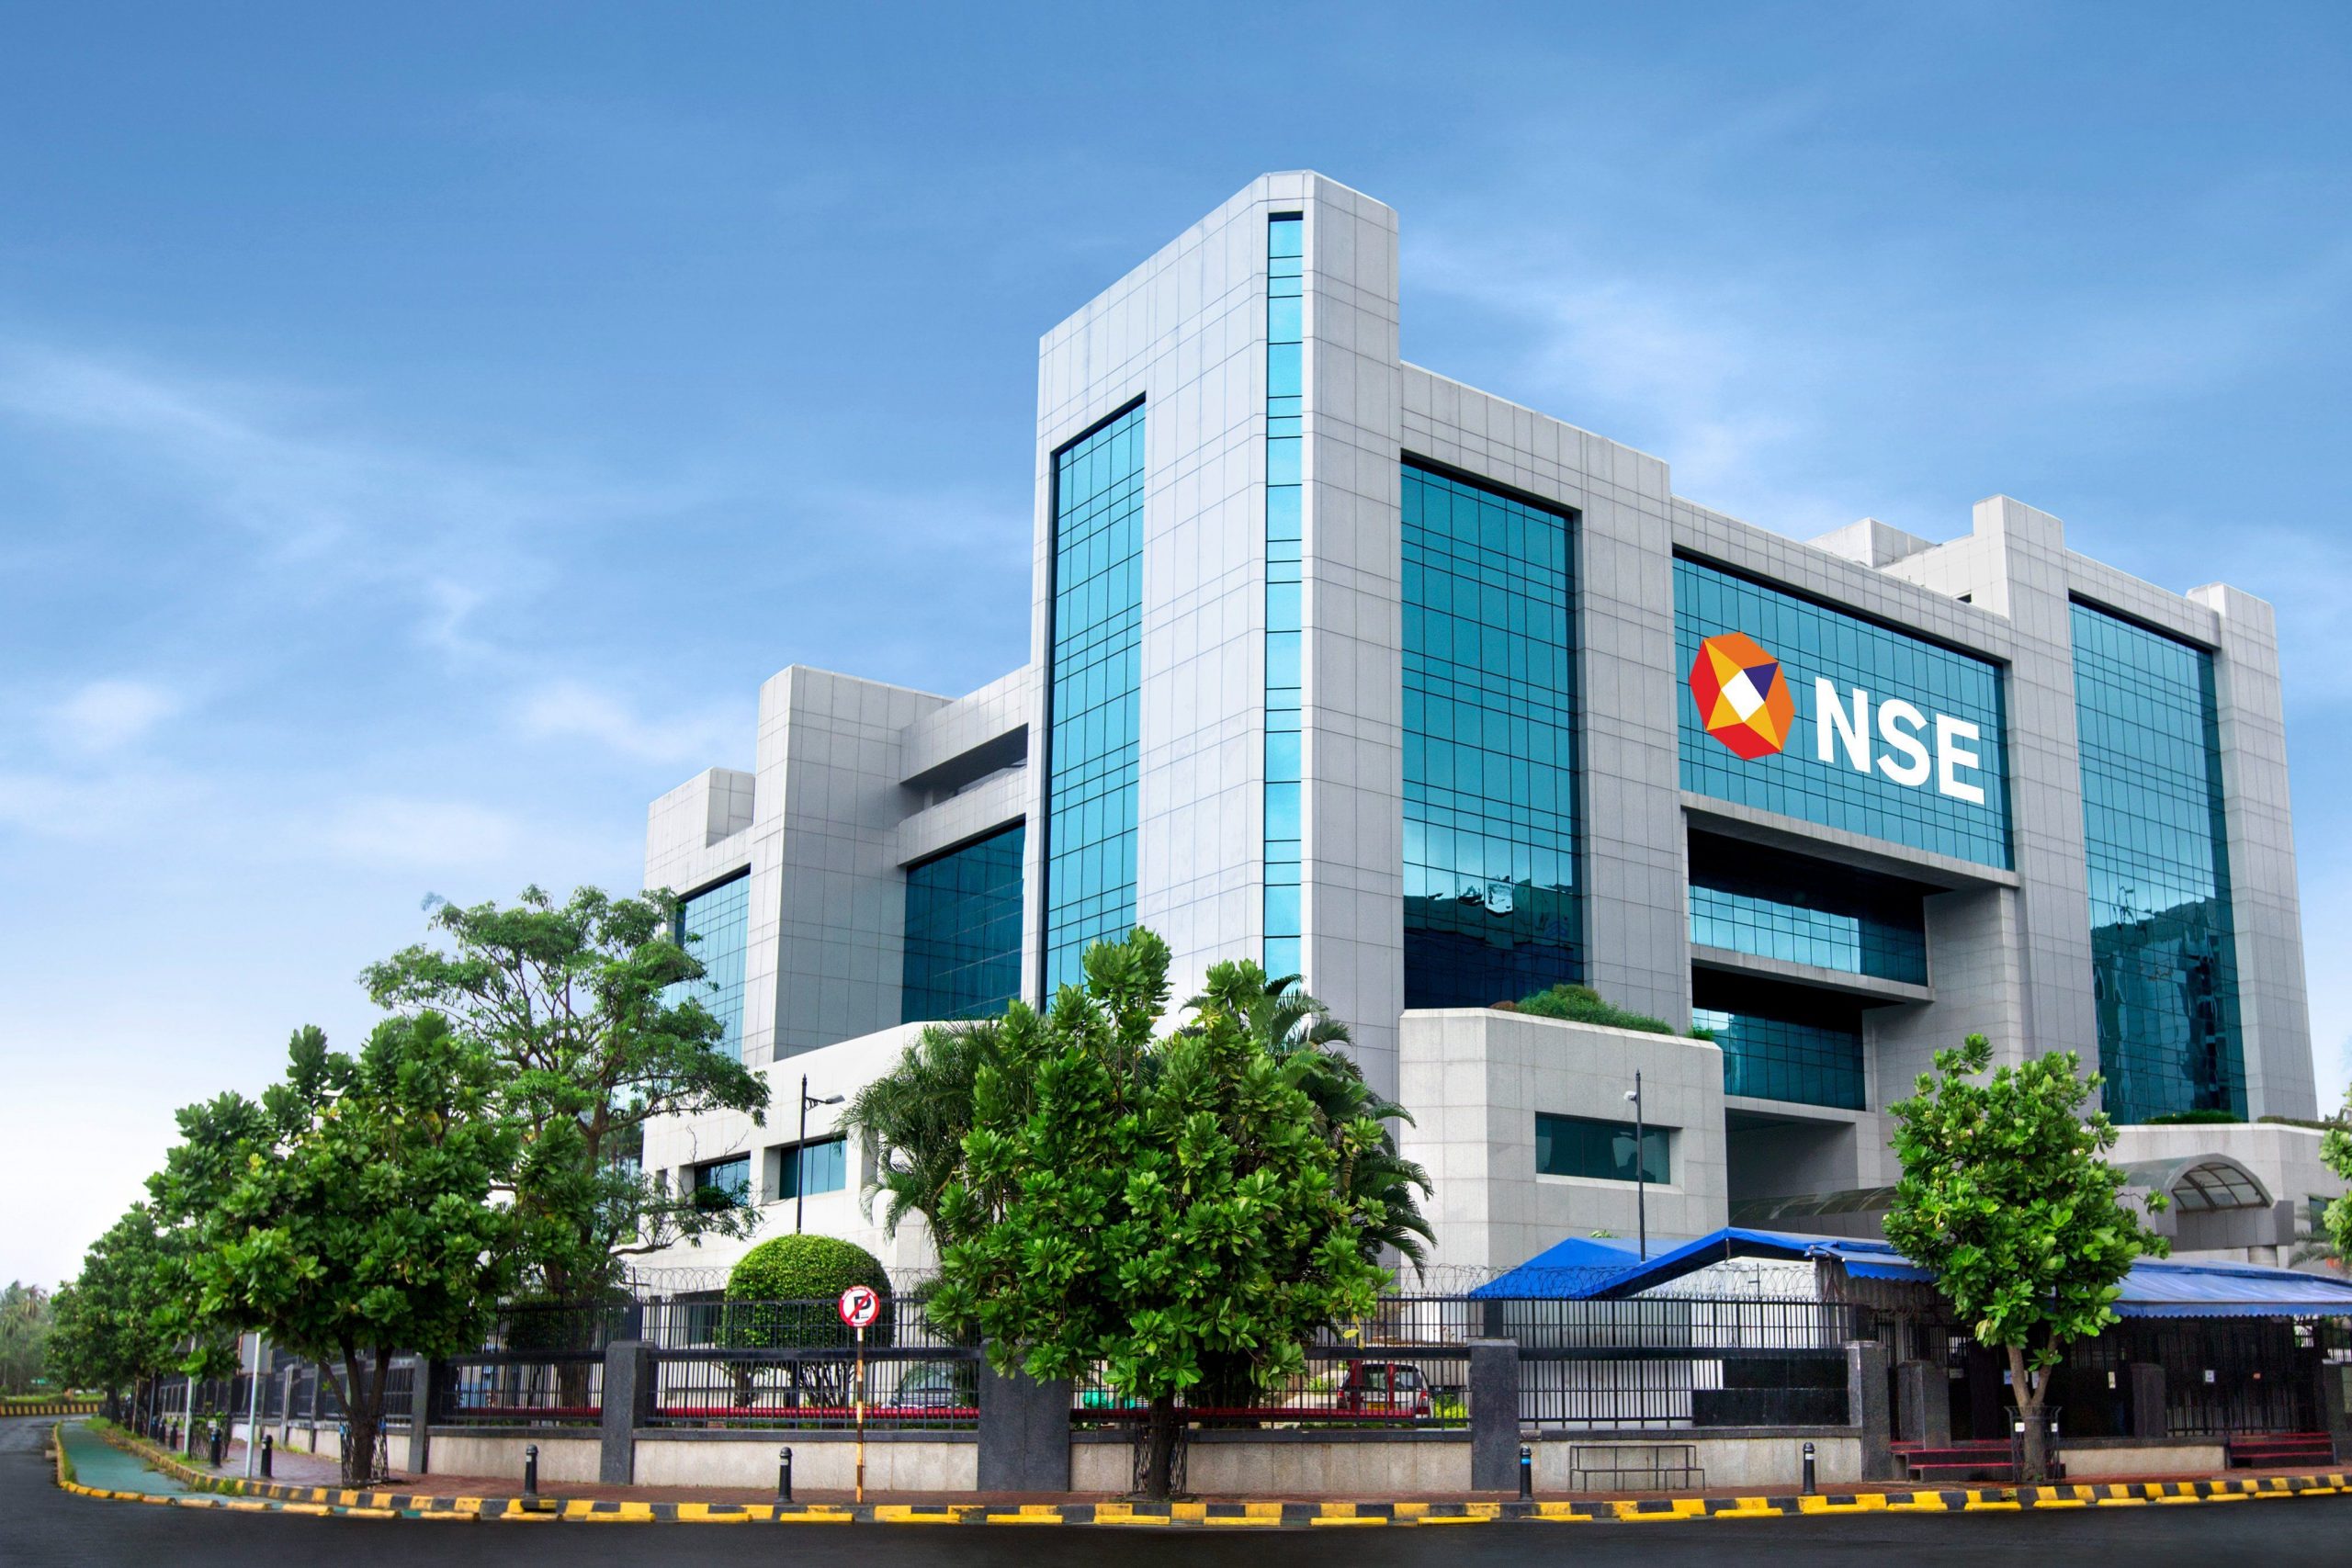 NSE F&O Ban: Sun Tv and others under ban on Tuesday, June 28, 2022